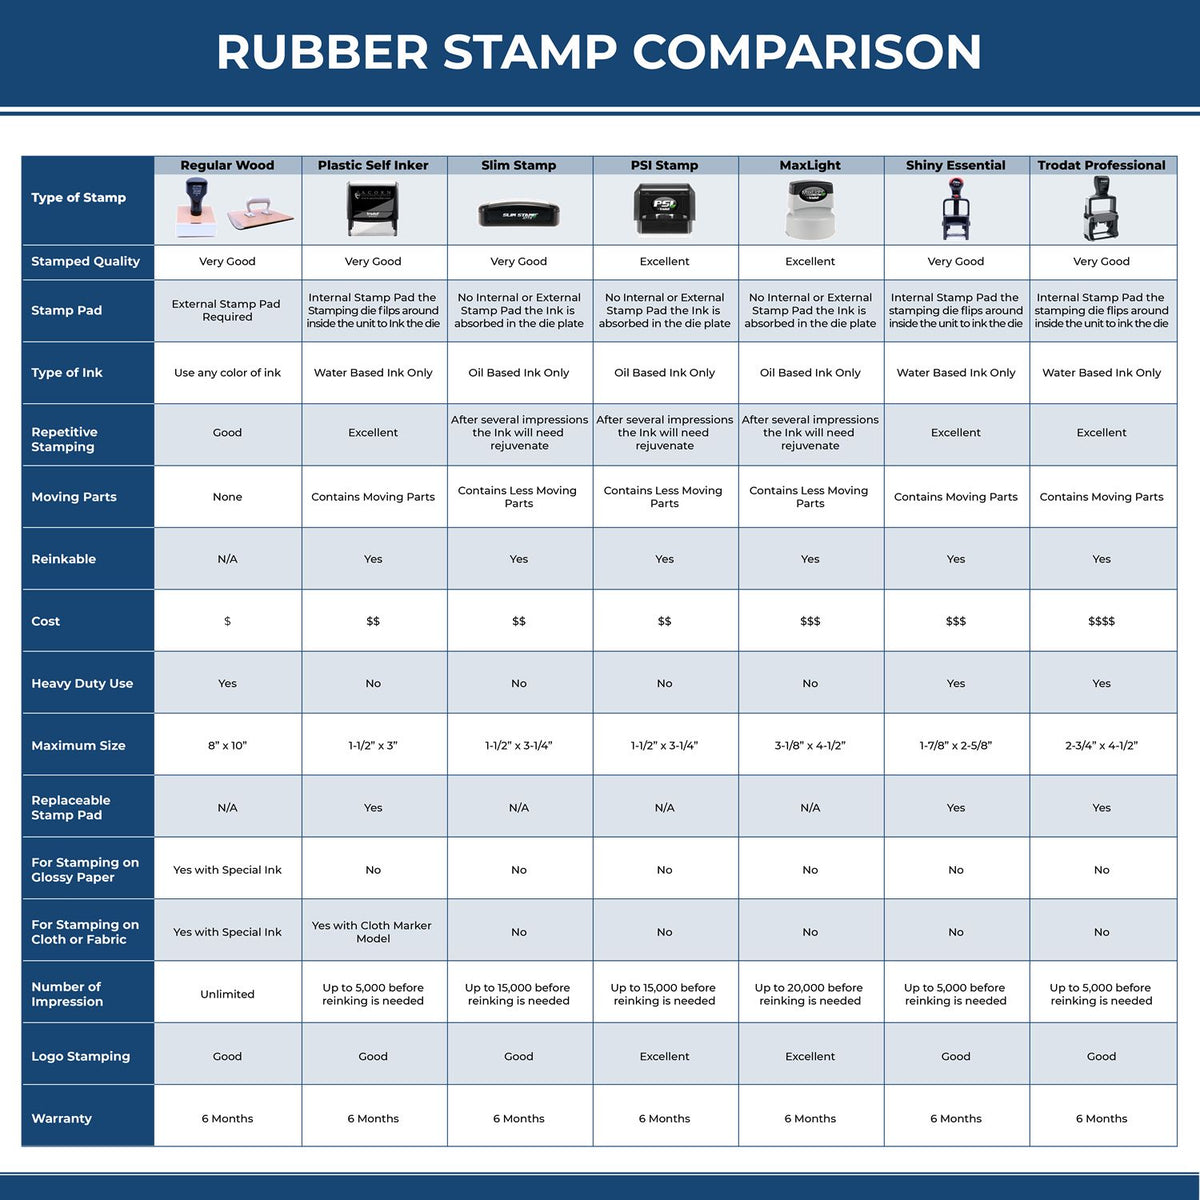 A comparison chart for the different types of mount models available for the Super Slim Montana Notary Public Stamp.